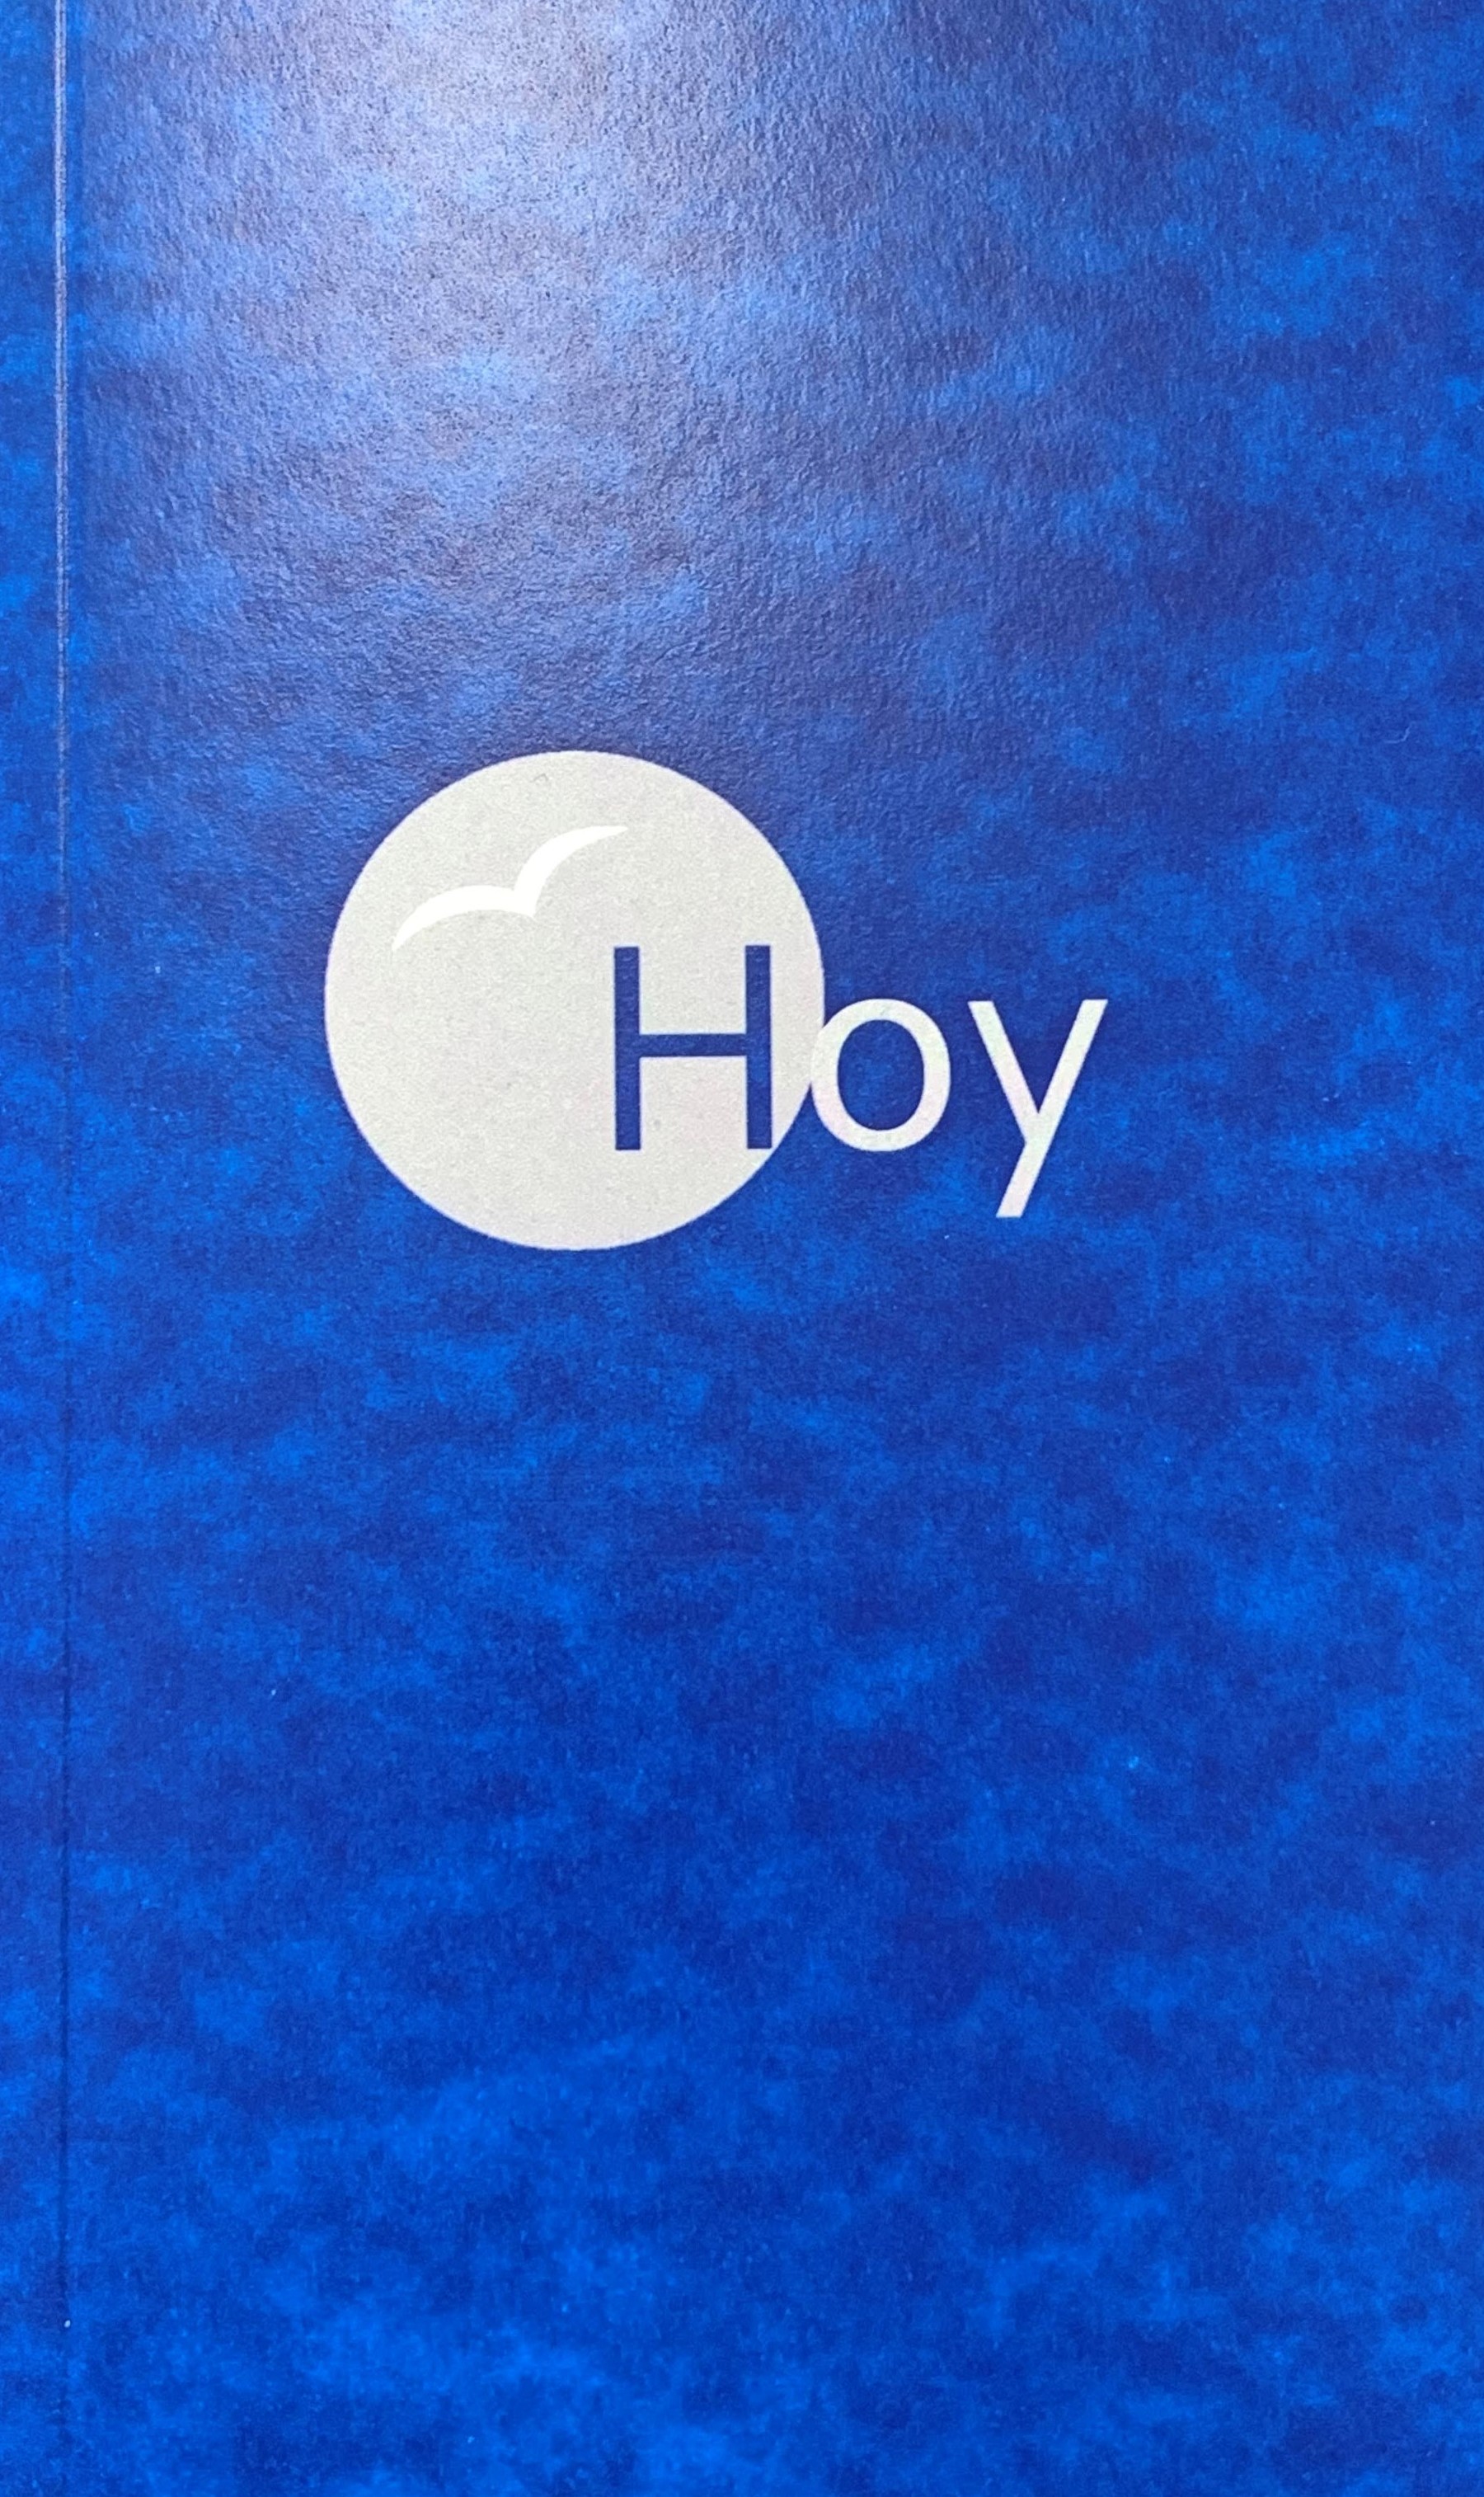 "Hoy" ("Today" Book in Spanish)